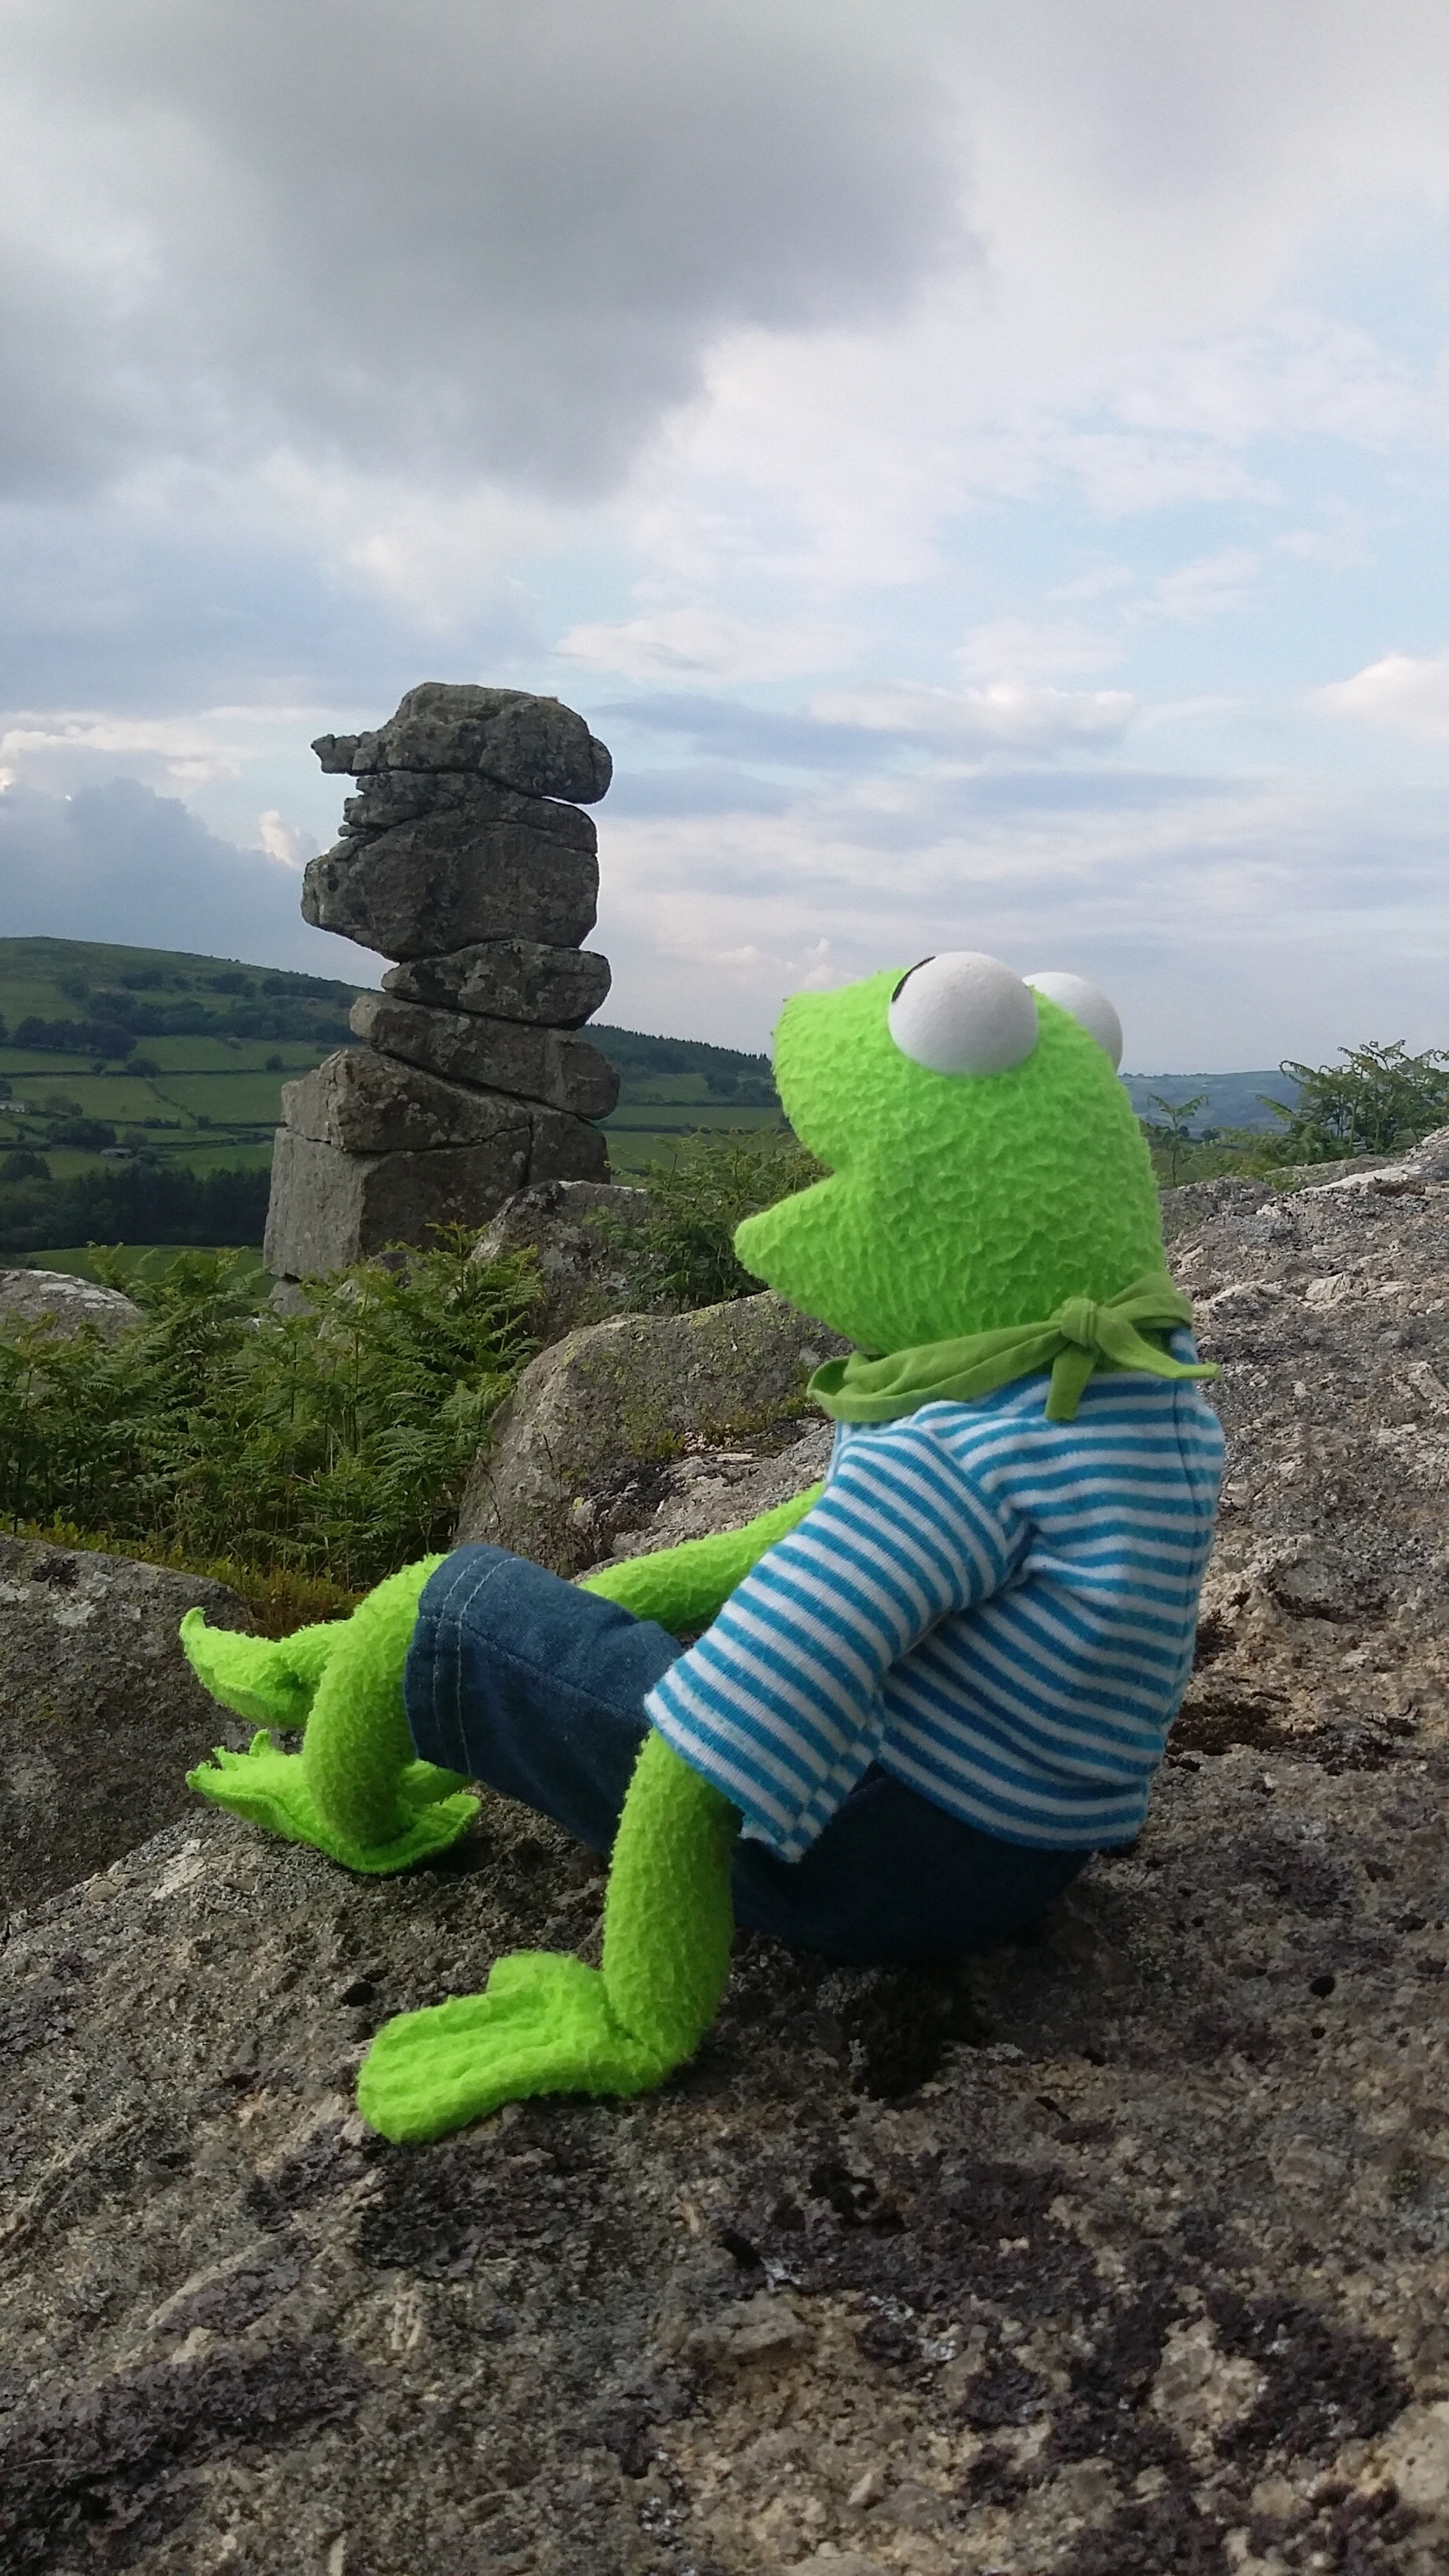 kermet the frog plush toy on ground and rock pile at distance under nimbus clouds